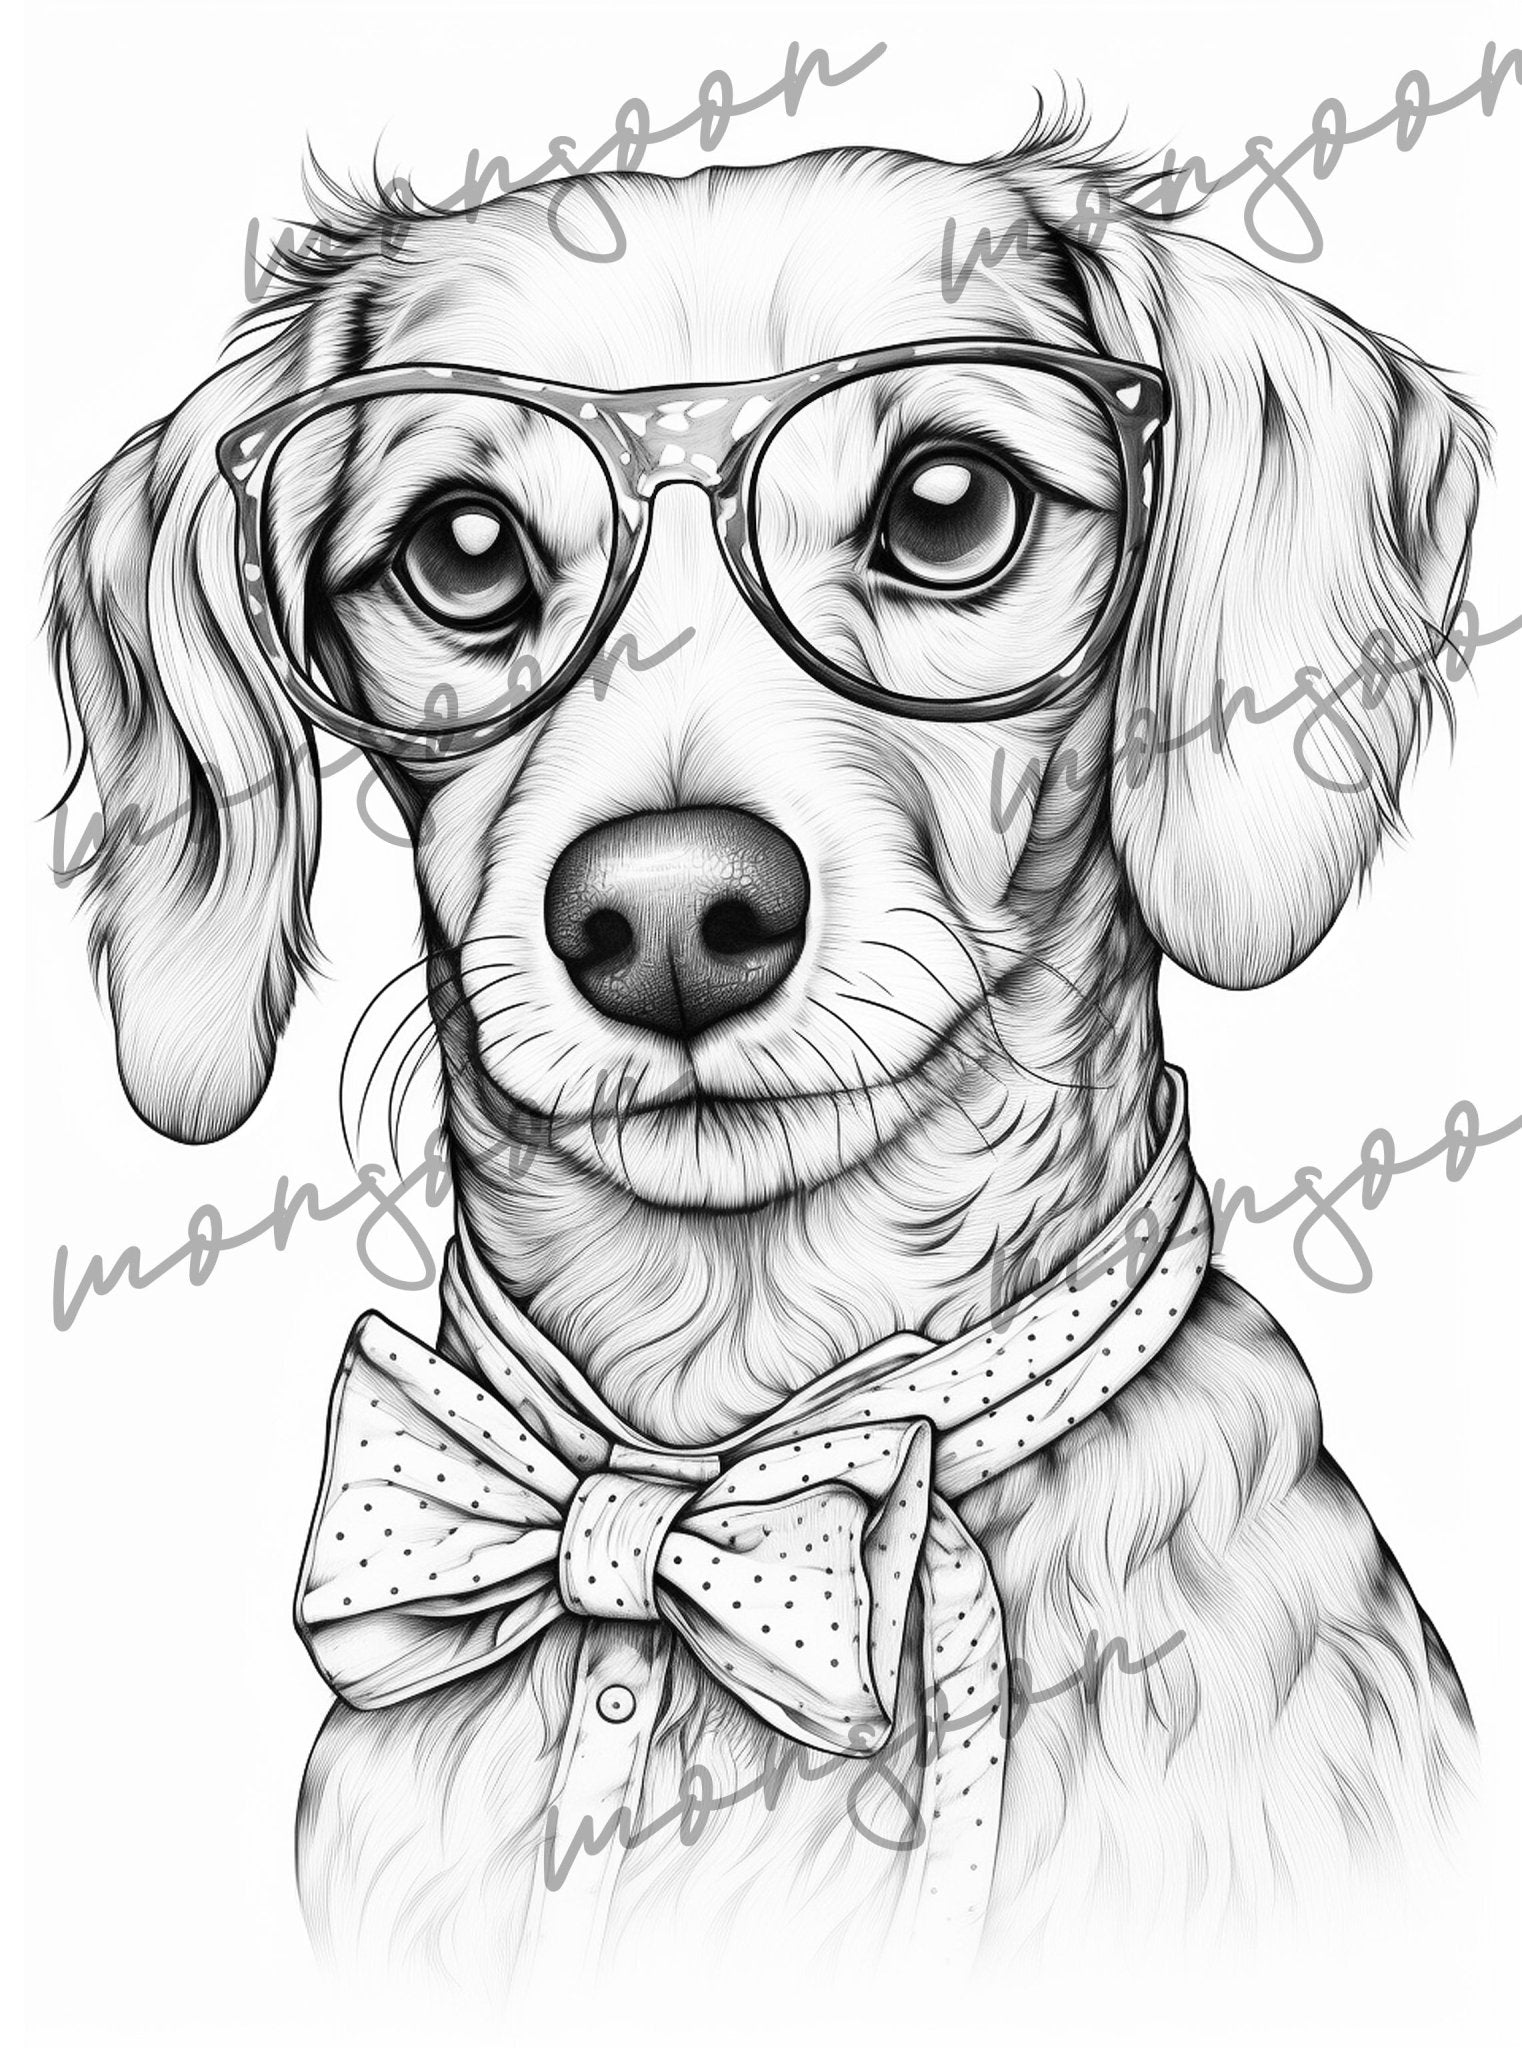 Dachshund Coloring Book Grayscale (Printbook) - Monsoon Publishing USA